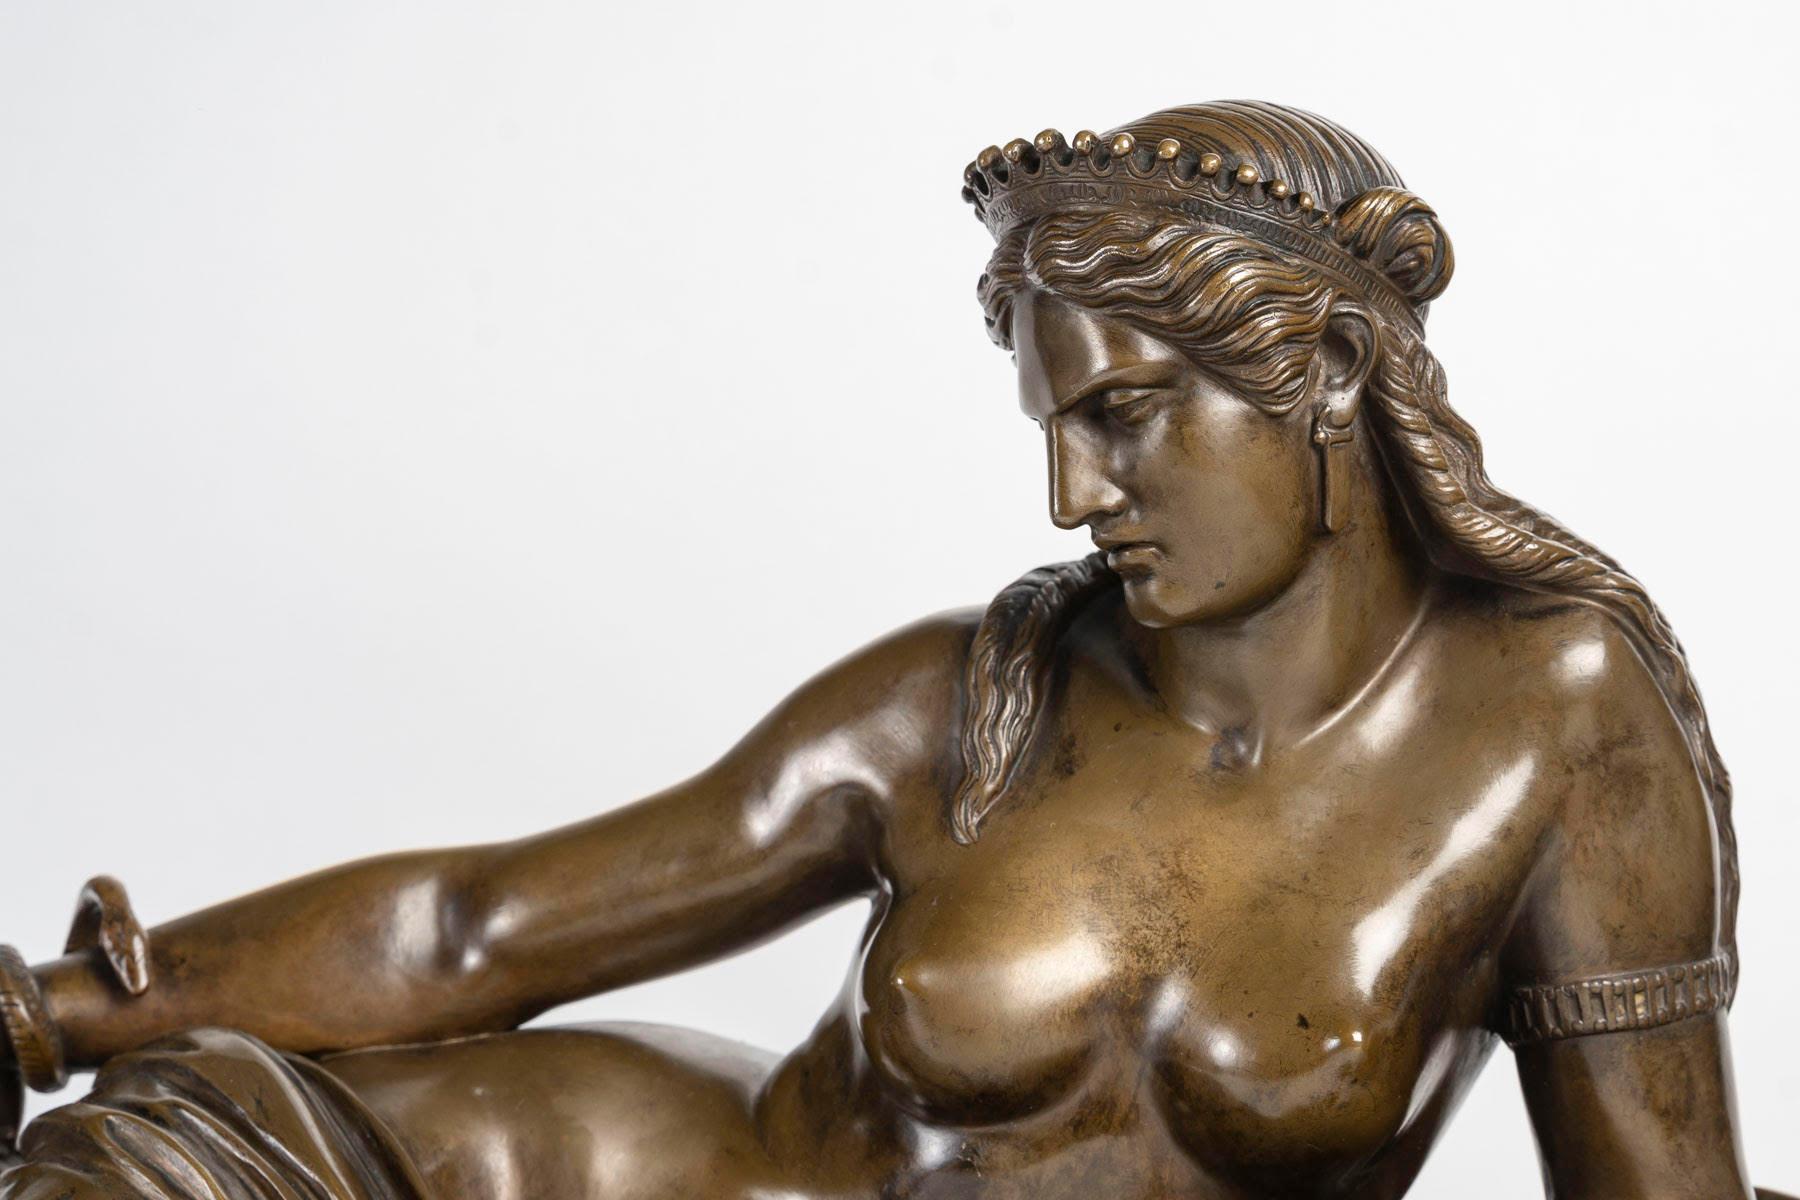 French Sculpture of Cleopatra Reclining, Sculpture Signed Barbedienne, Napoleon Period. For Sale